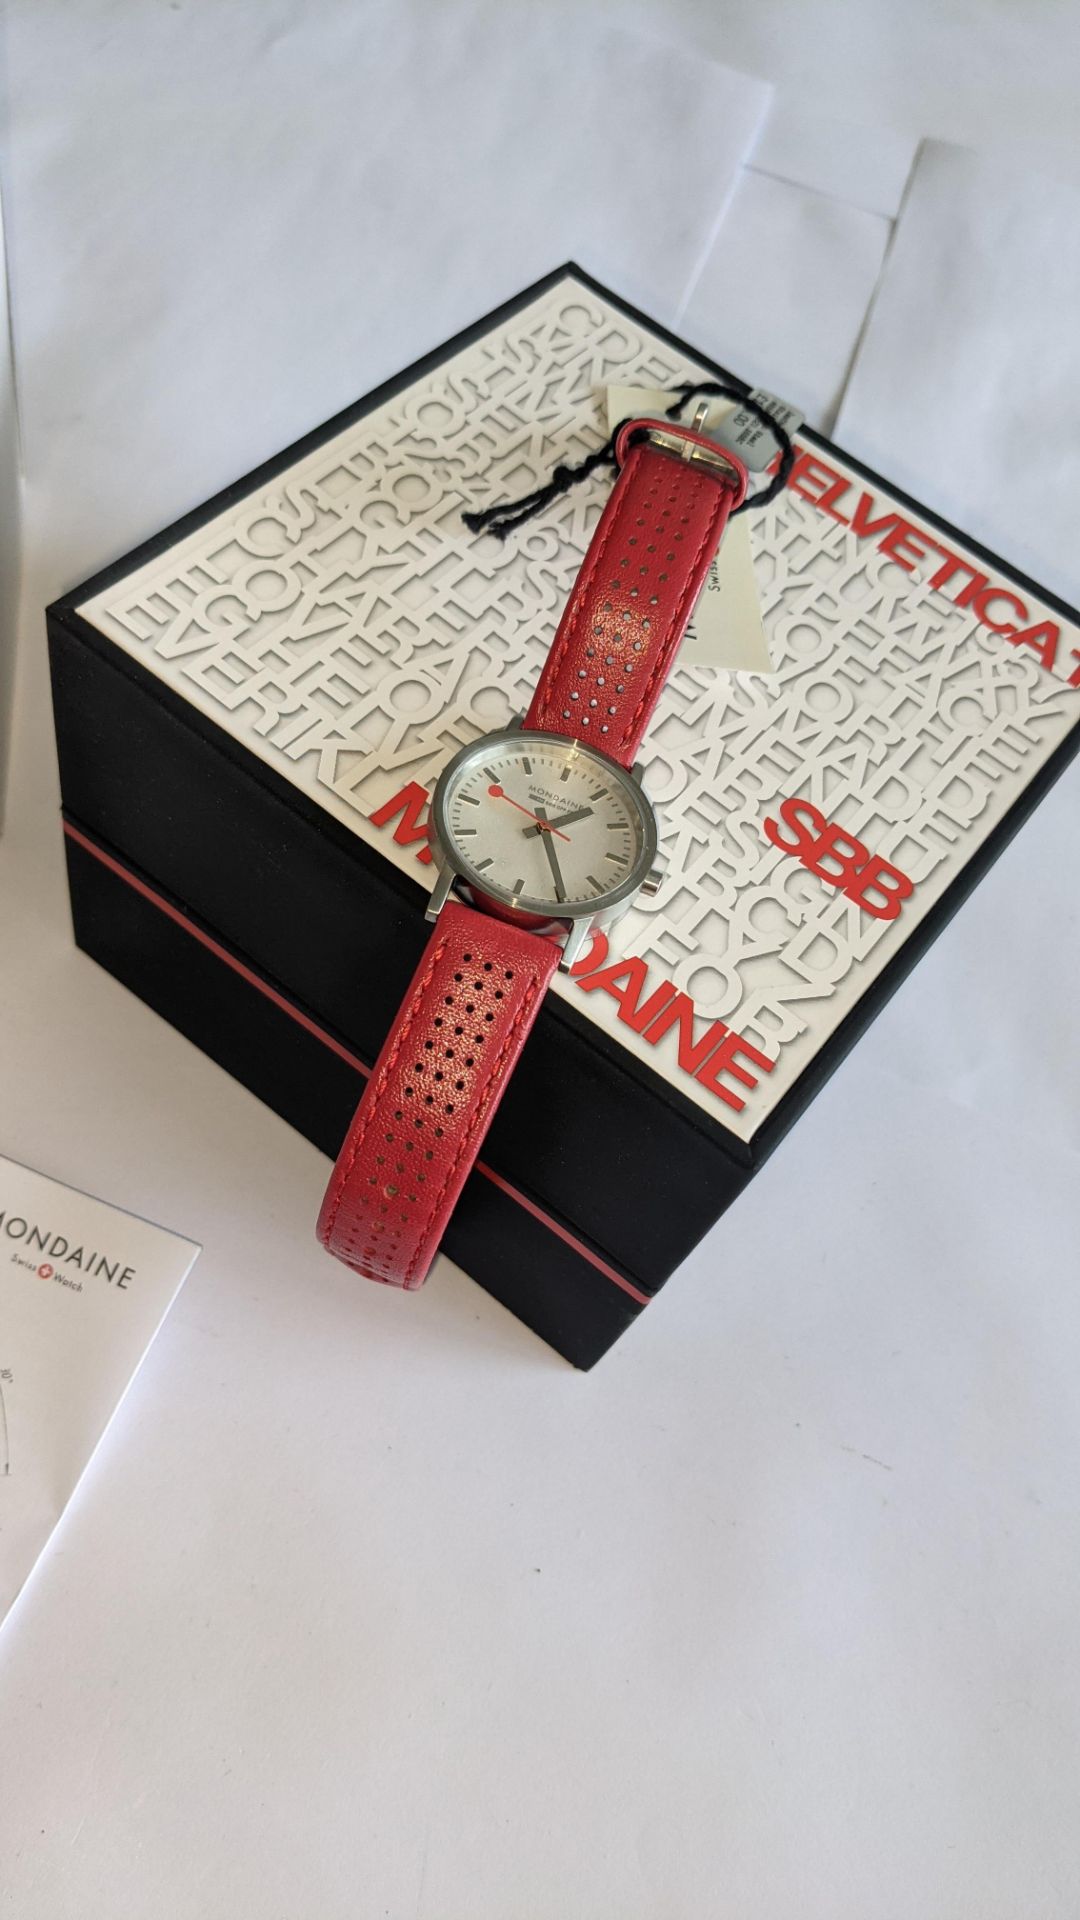 Mondaine watch on red leather strap. Product code A658.30323.16SBC. Water resistant, stainless steel - Image 15 of 15